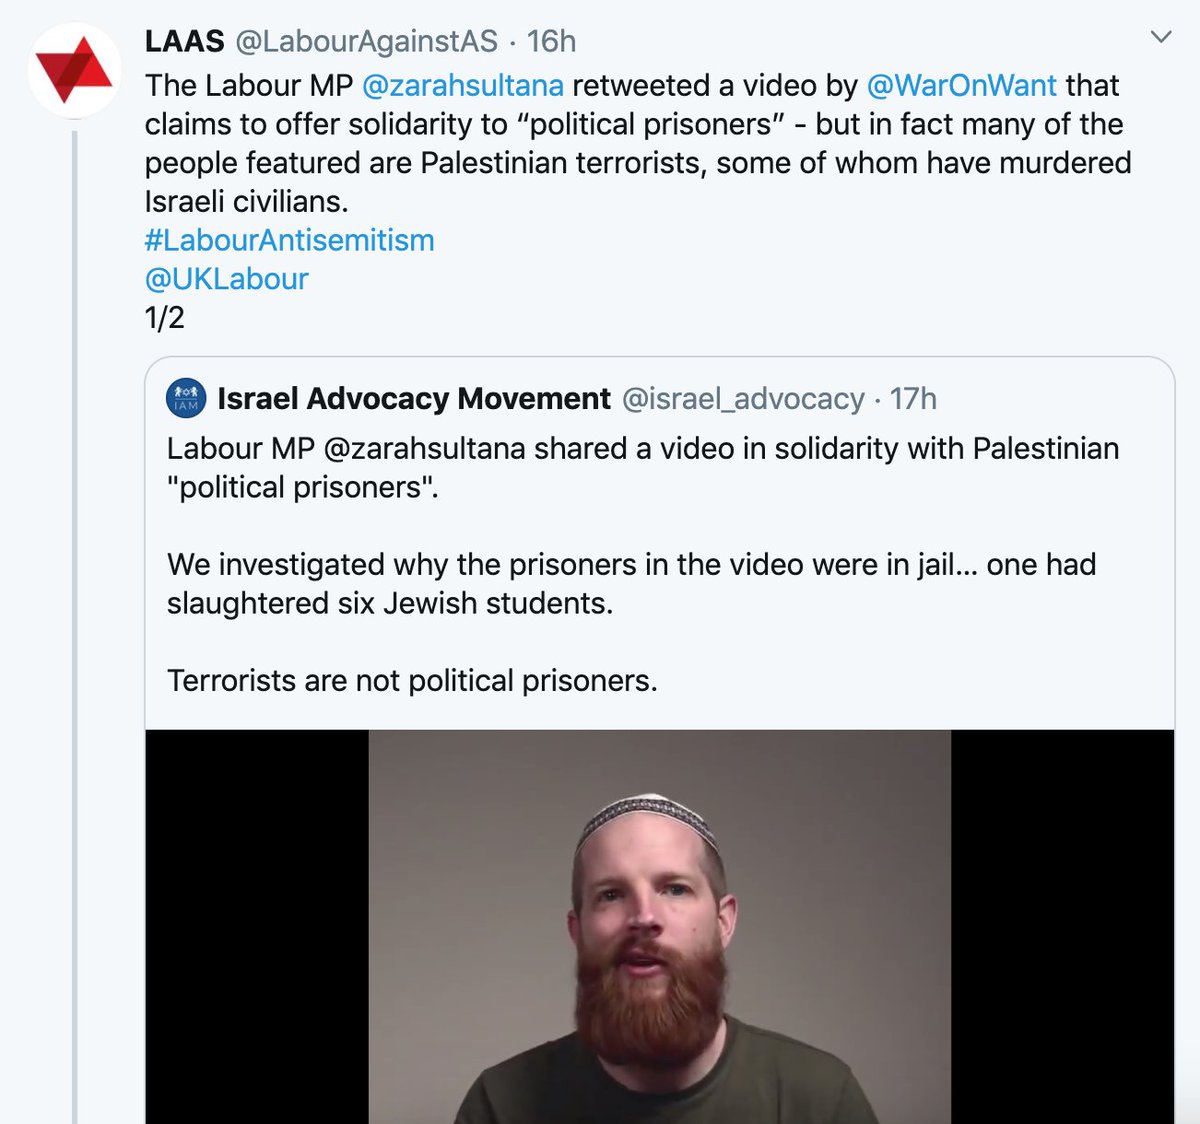 Israel Advocacy Movement. Not hiding that he is an 'Israel Firster' and it's all about Israel for him.  #IsraelLobby  #Labour  #ZahraSultan